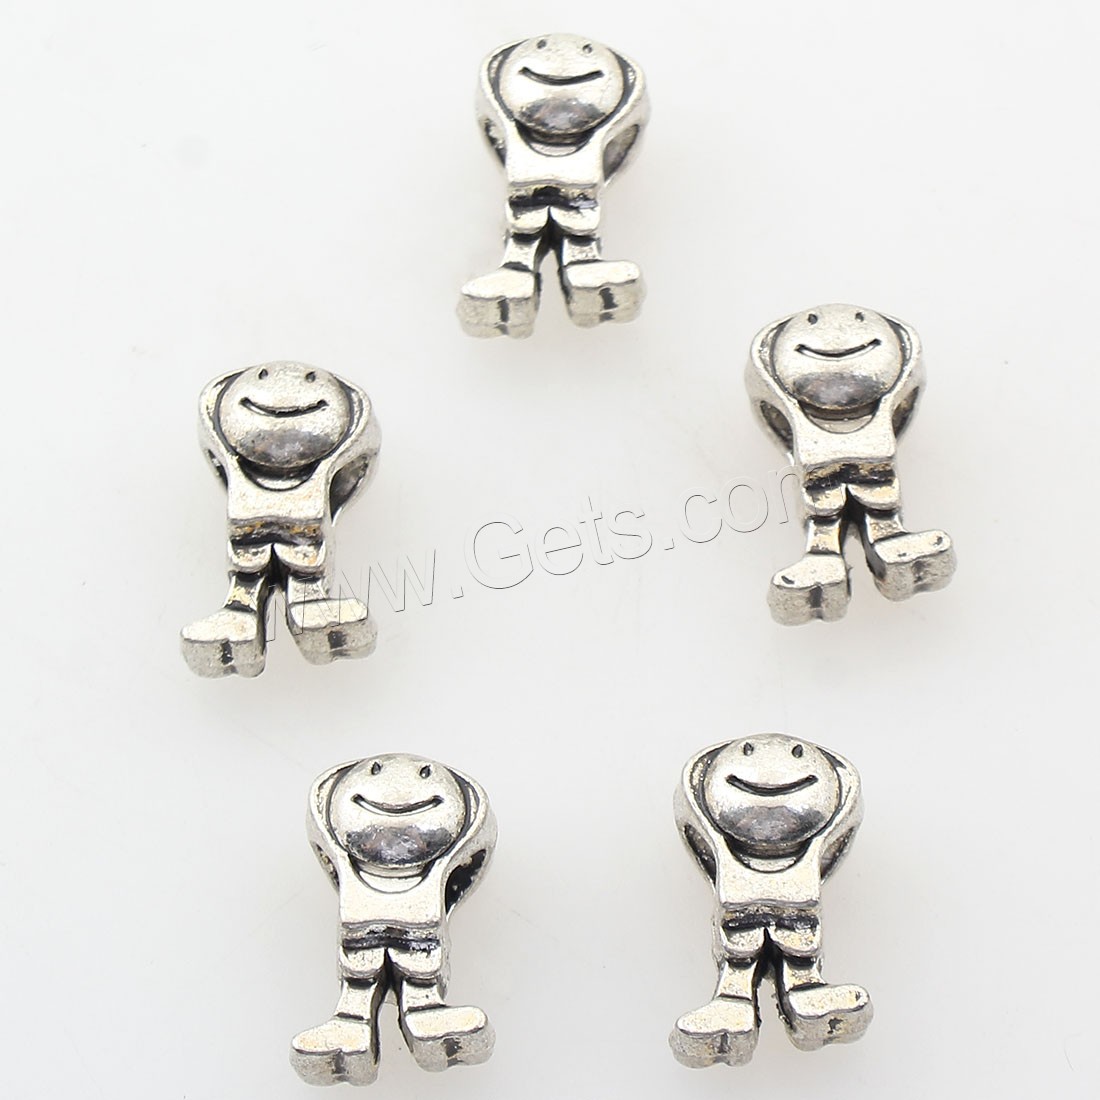 Zinc Alloy Jewelry Beads, antique silver color plated, 9x16mm, Hole:Approx 4mm, Approx 160PCs/Bag, Sold By Bag